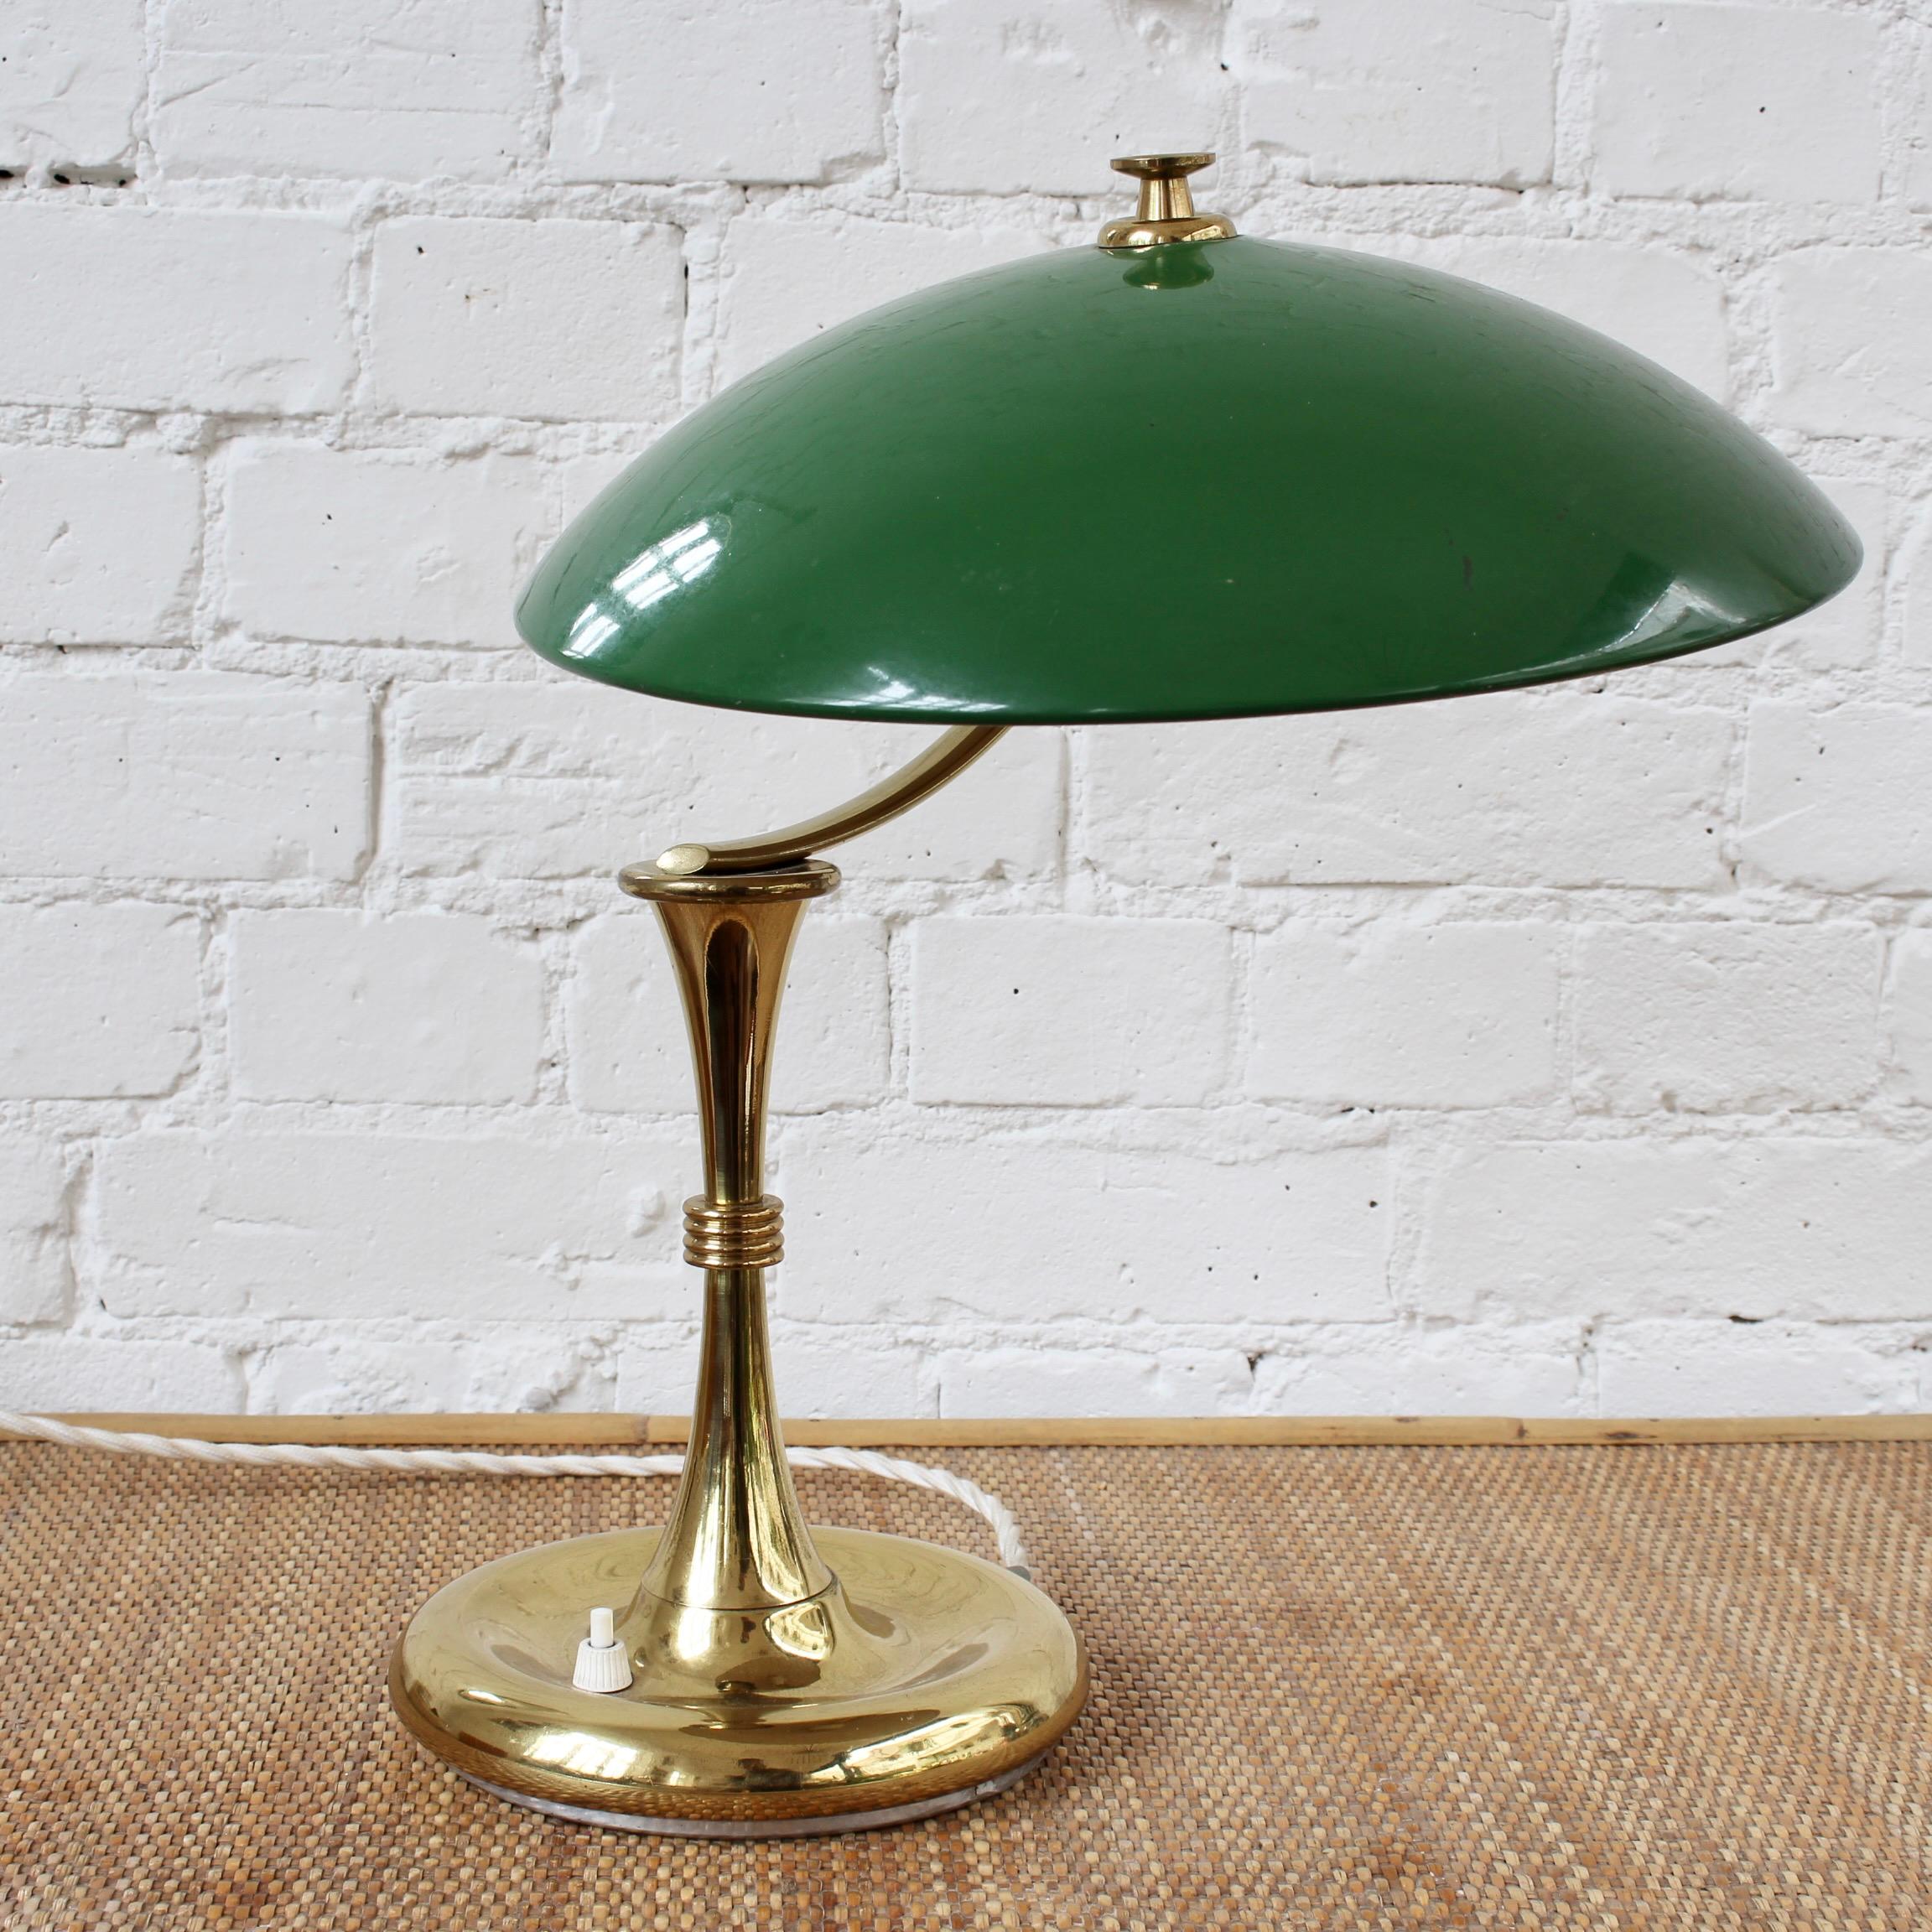 Italian Mid-Century Brass-Covered Desk Lamp with Green Shade 'circa 1950s' For Sale 3